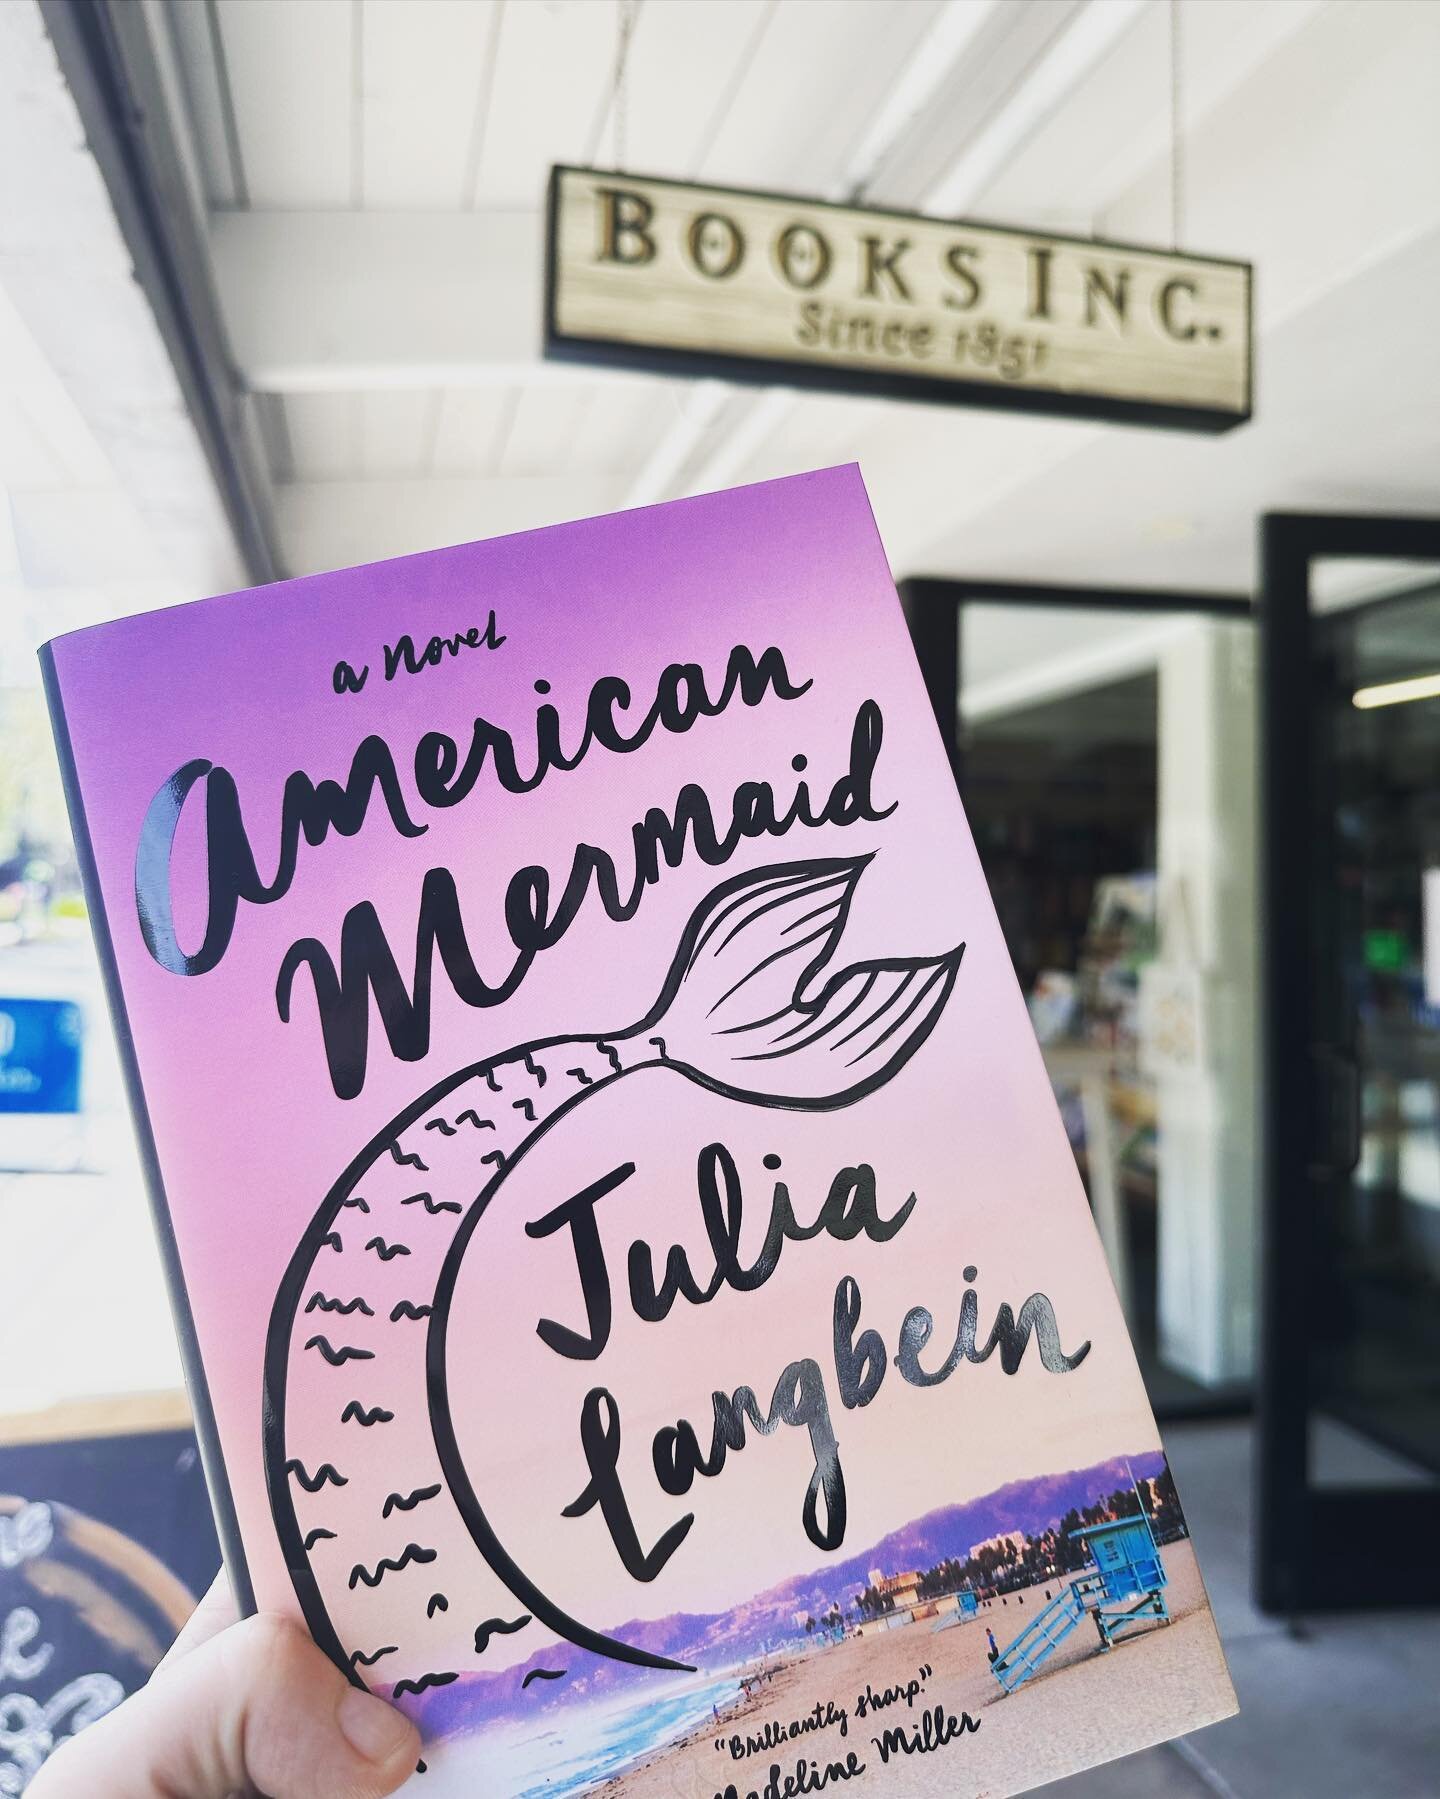 I&rsquo;m a little late to the molly-fueled after party, but I just picked up my copy of the brilliant and funny @juliallangbein&rsquo;s American Mermaid. Can&rsquo;t wait to dive in! 

#americanmermaid #julialangbein #bookstagram #fiction #amreading